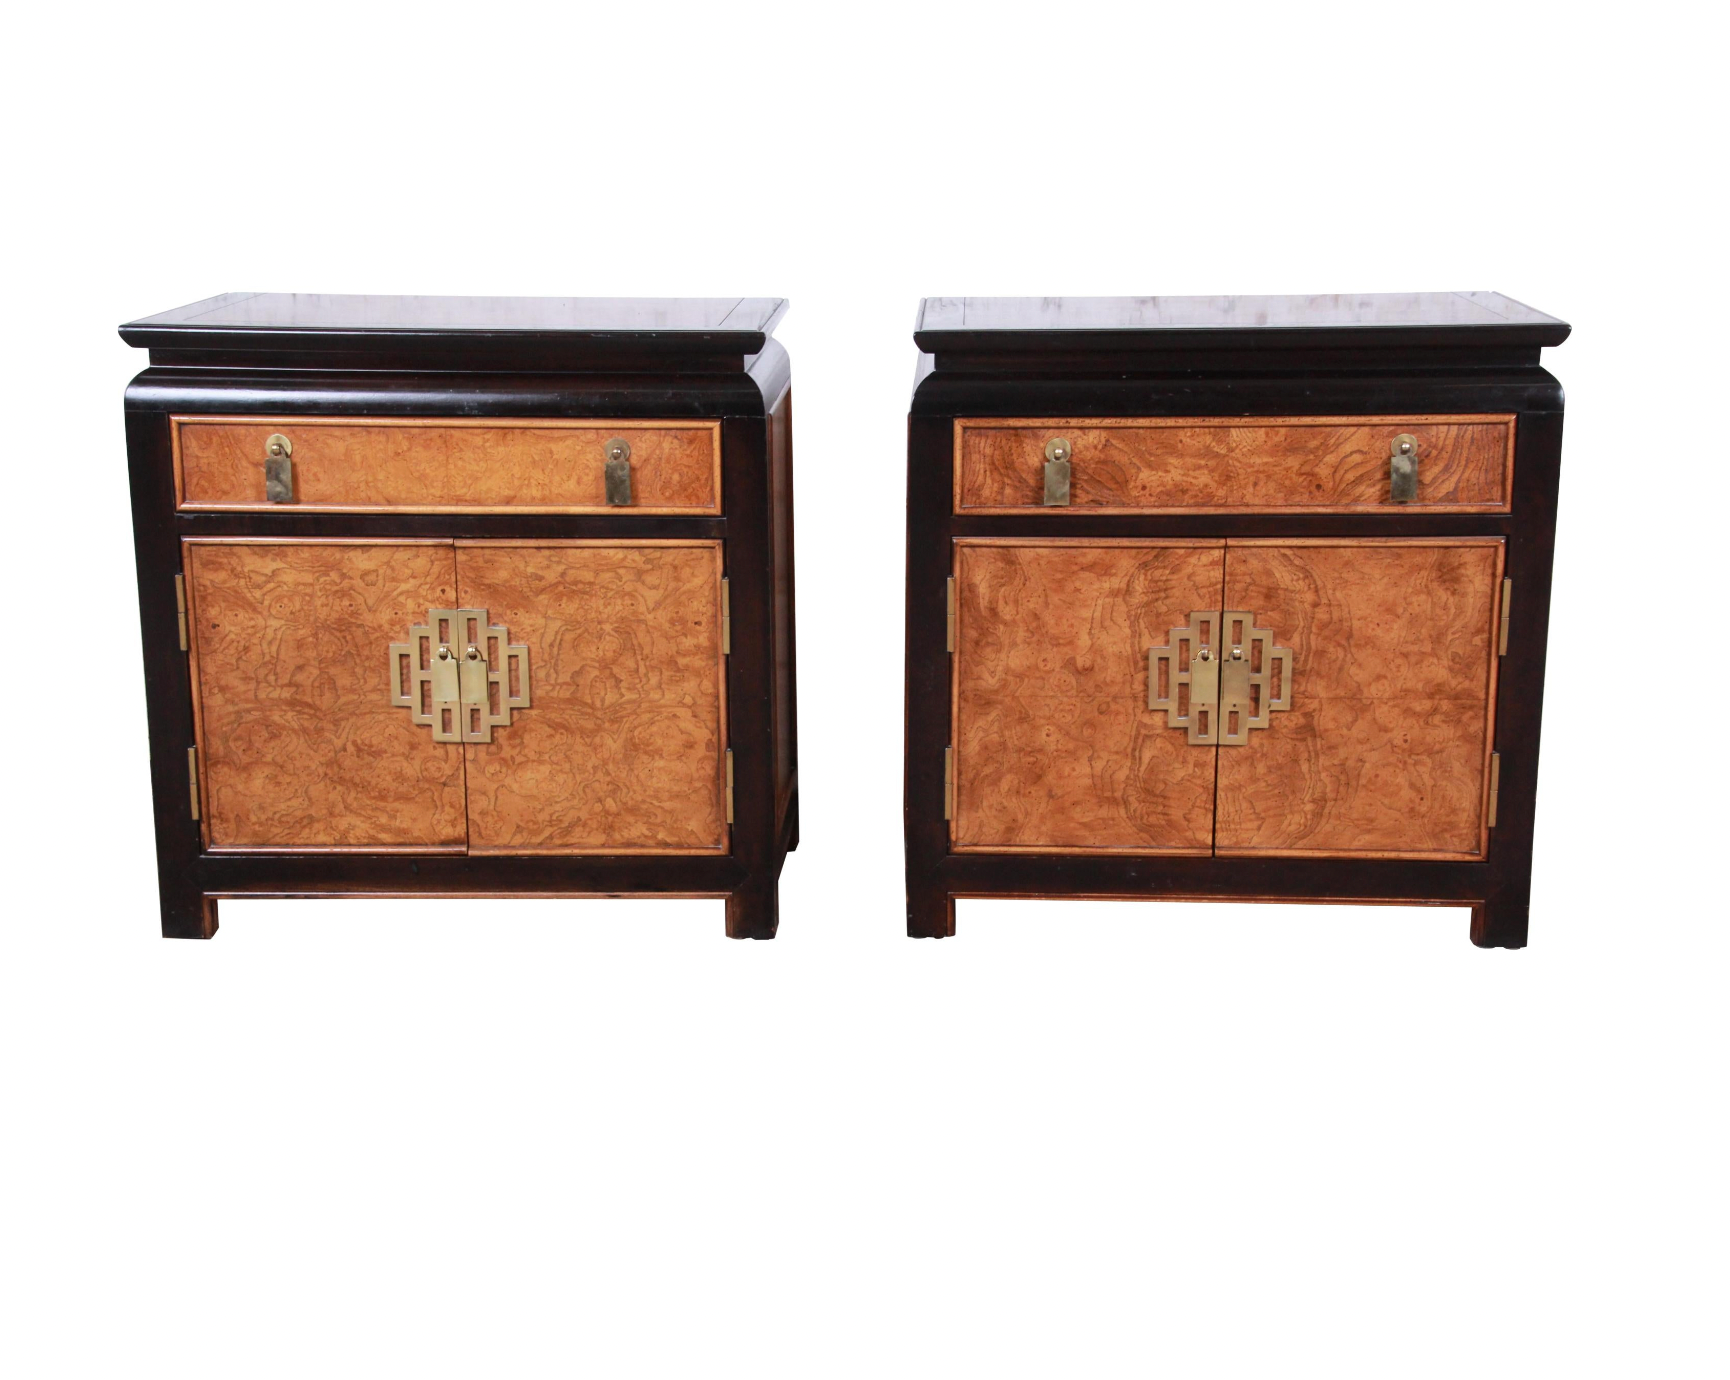 Century Furniture Chinoserie Burl Wood Nightstand Pair Available for Custom Lacquer!